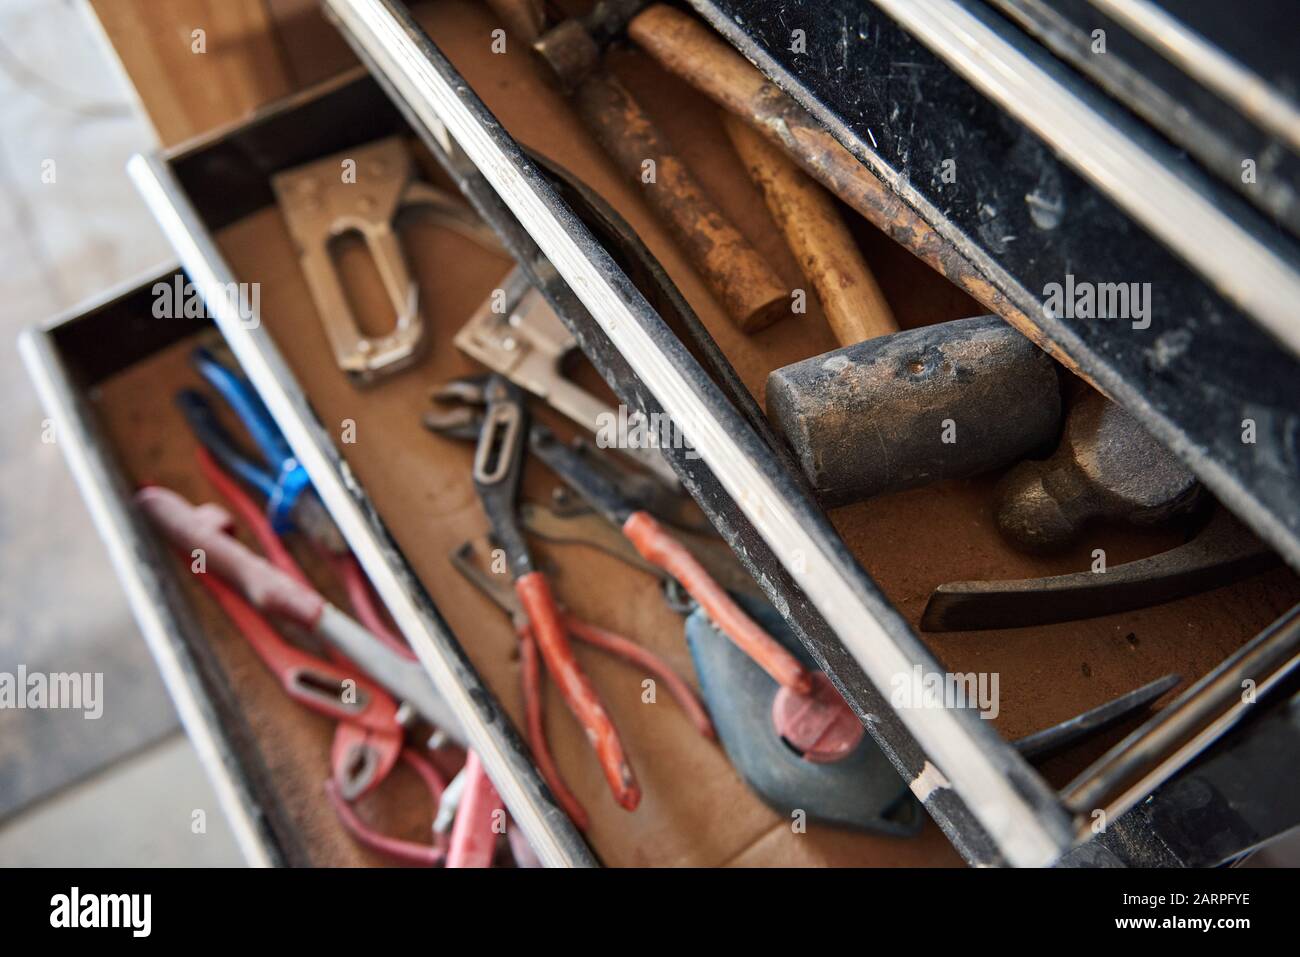 Hammers and tools in open drawers of a workbench Stock Photo